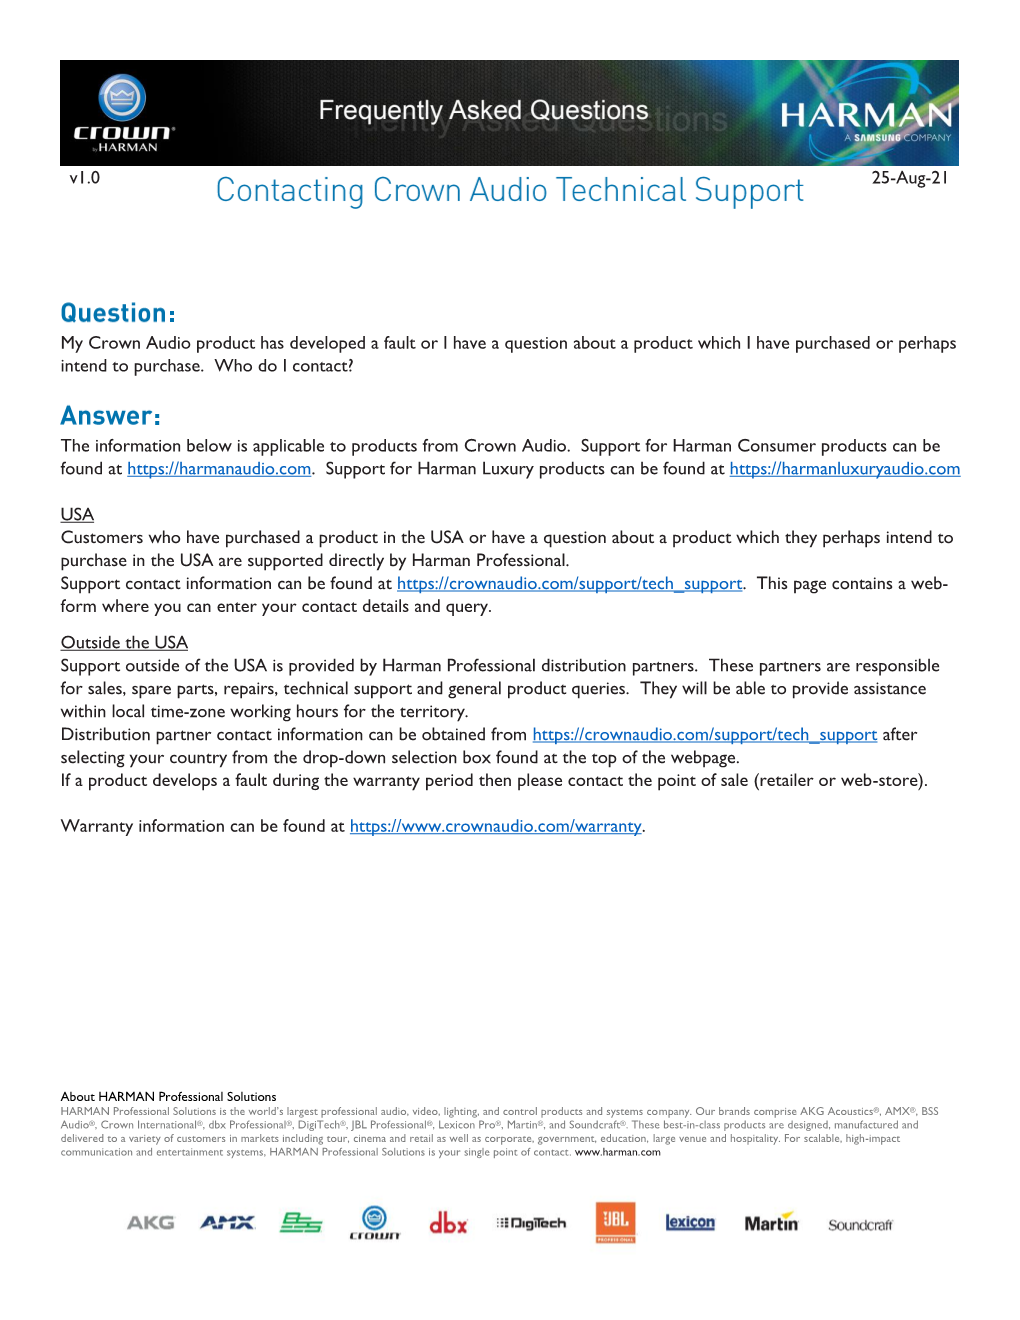 Contacting Crown Audio Technical Support